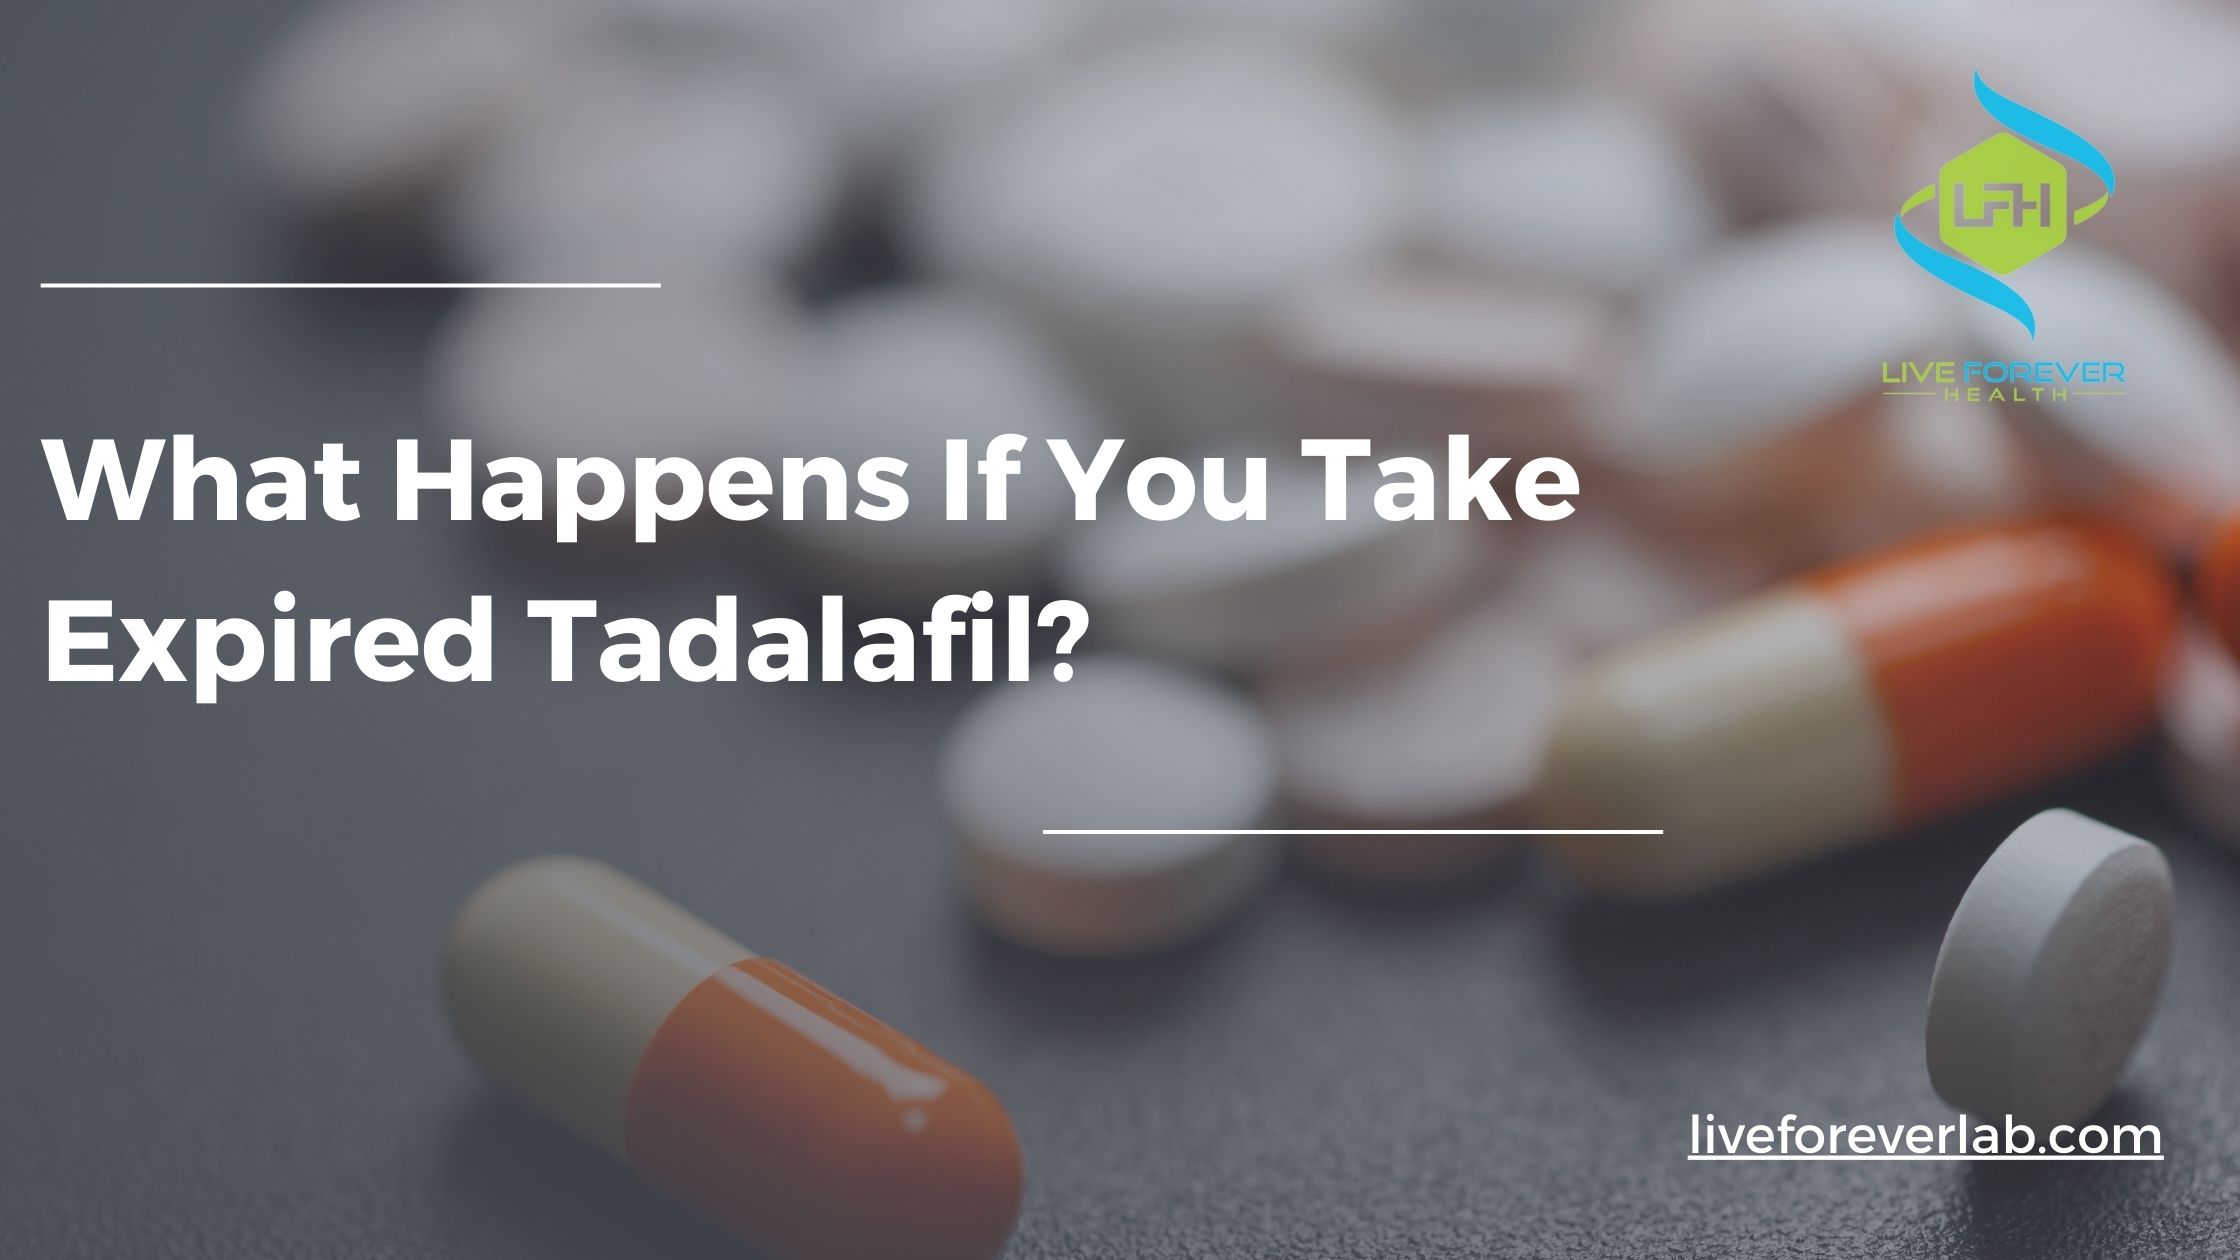 What Happens If You Take Expired Tadalafil